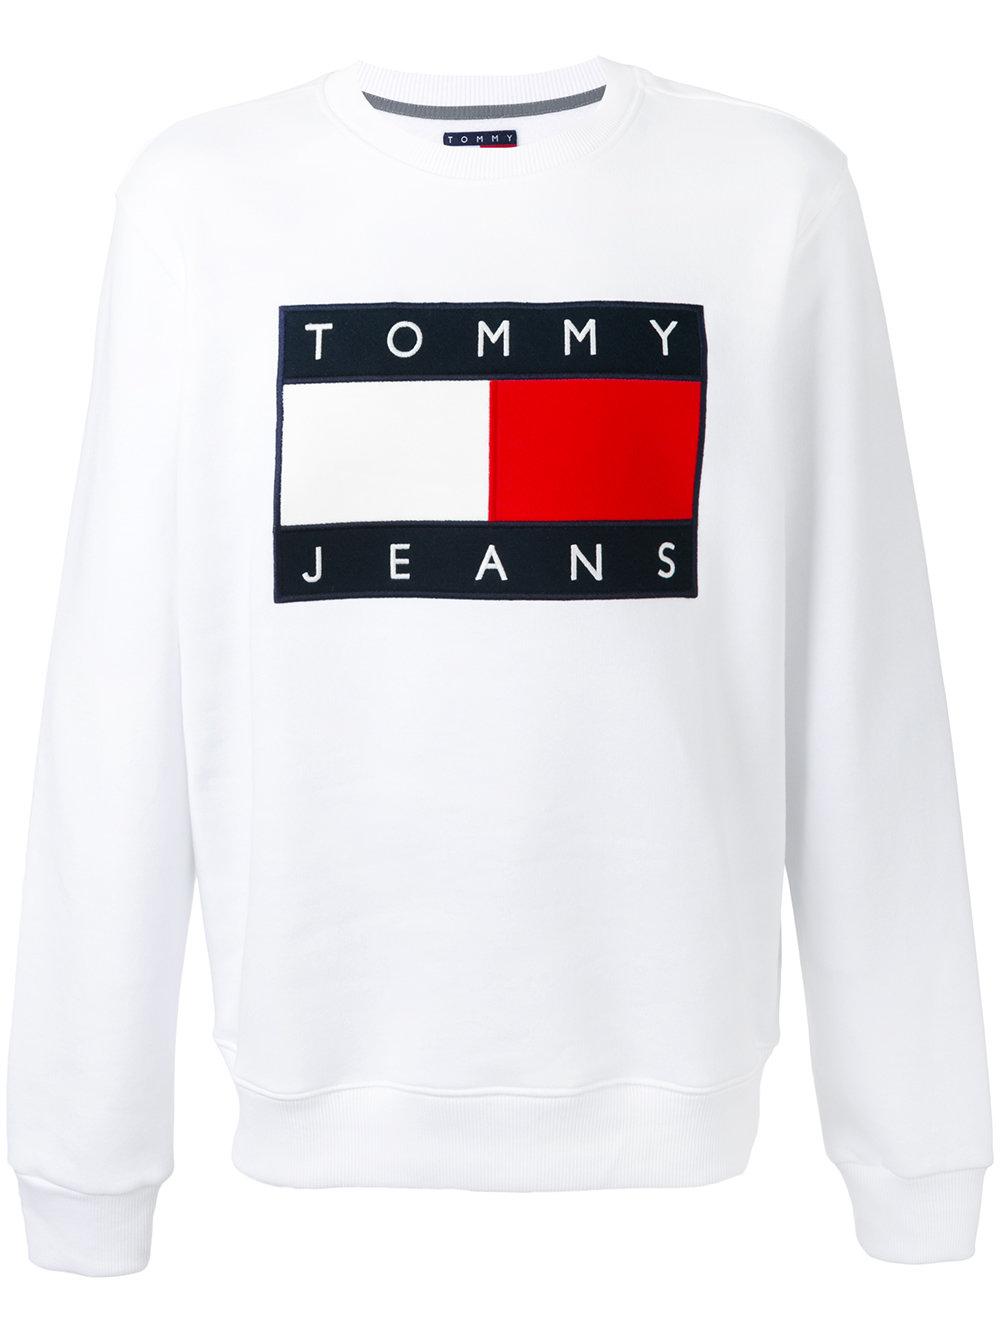 Tommy hilfiger Classic Logo Printed Sweatshirt in White for Men | Lyst